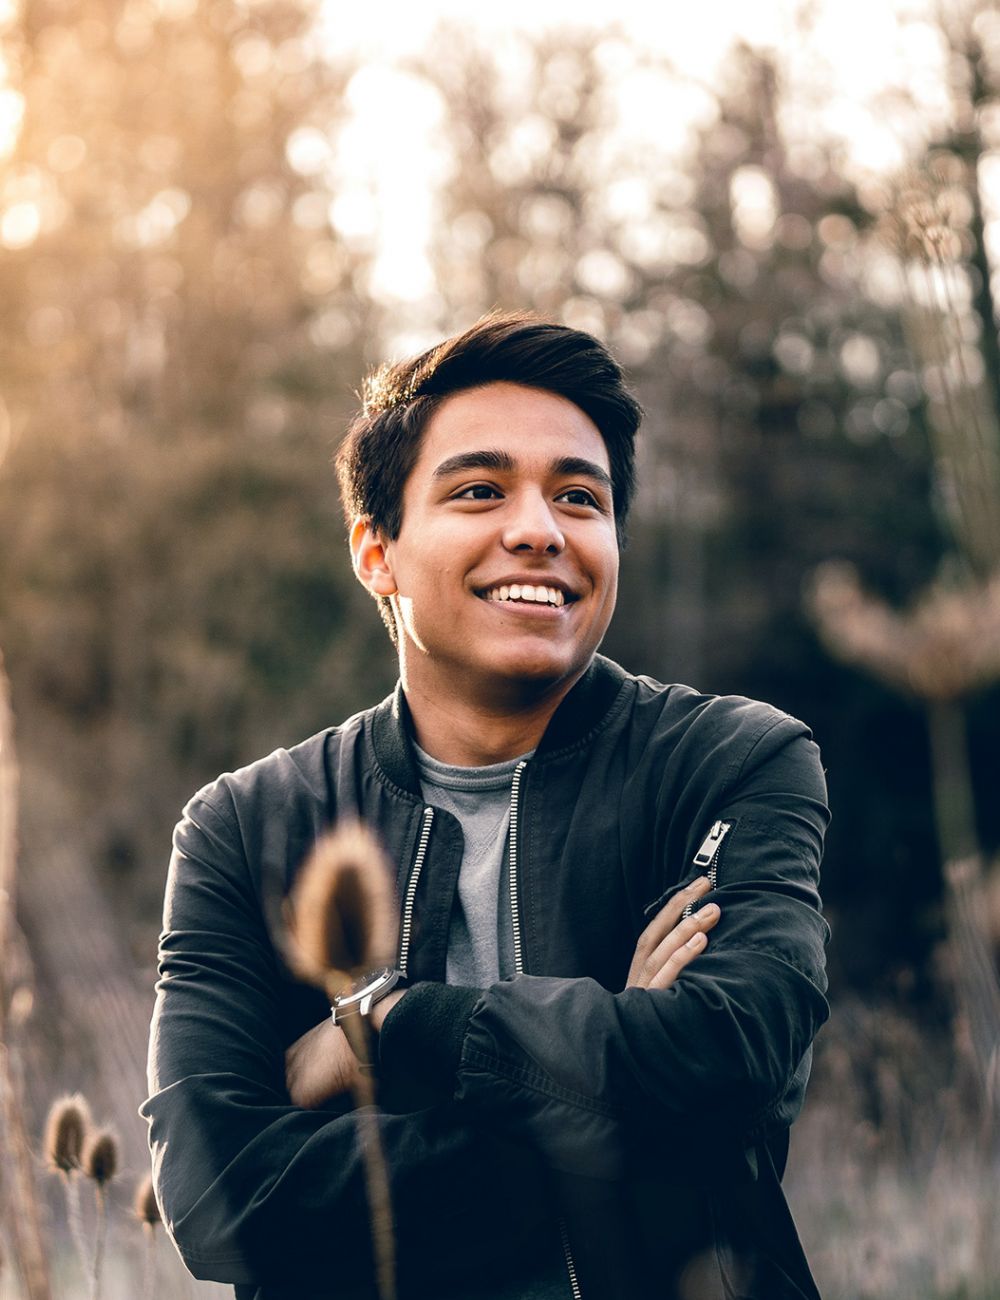 Smiling man outside against forest background